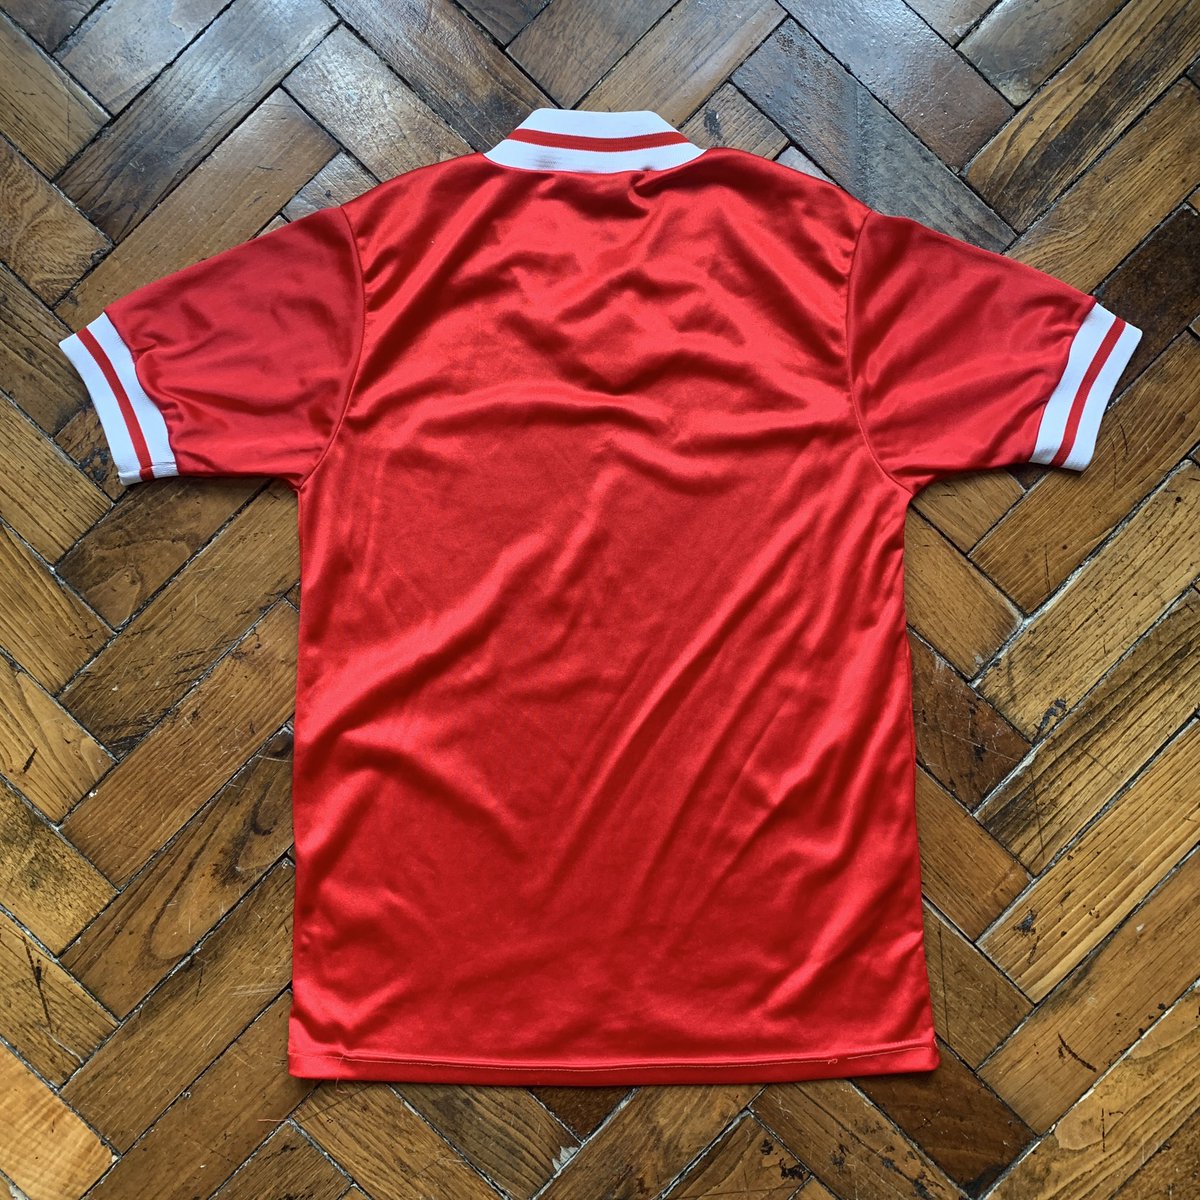 That new #LFC shirt is causing some debate… No point messing about whenever you can buy the inspiration for it! 👀 ⬇️ 8️⃣2️⃣/8️⃣5️⃣ #liverpool [HOME] (S) 🔴⚪️ #VintageKitCo vintagekitco.com/shop-vintage/8…